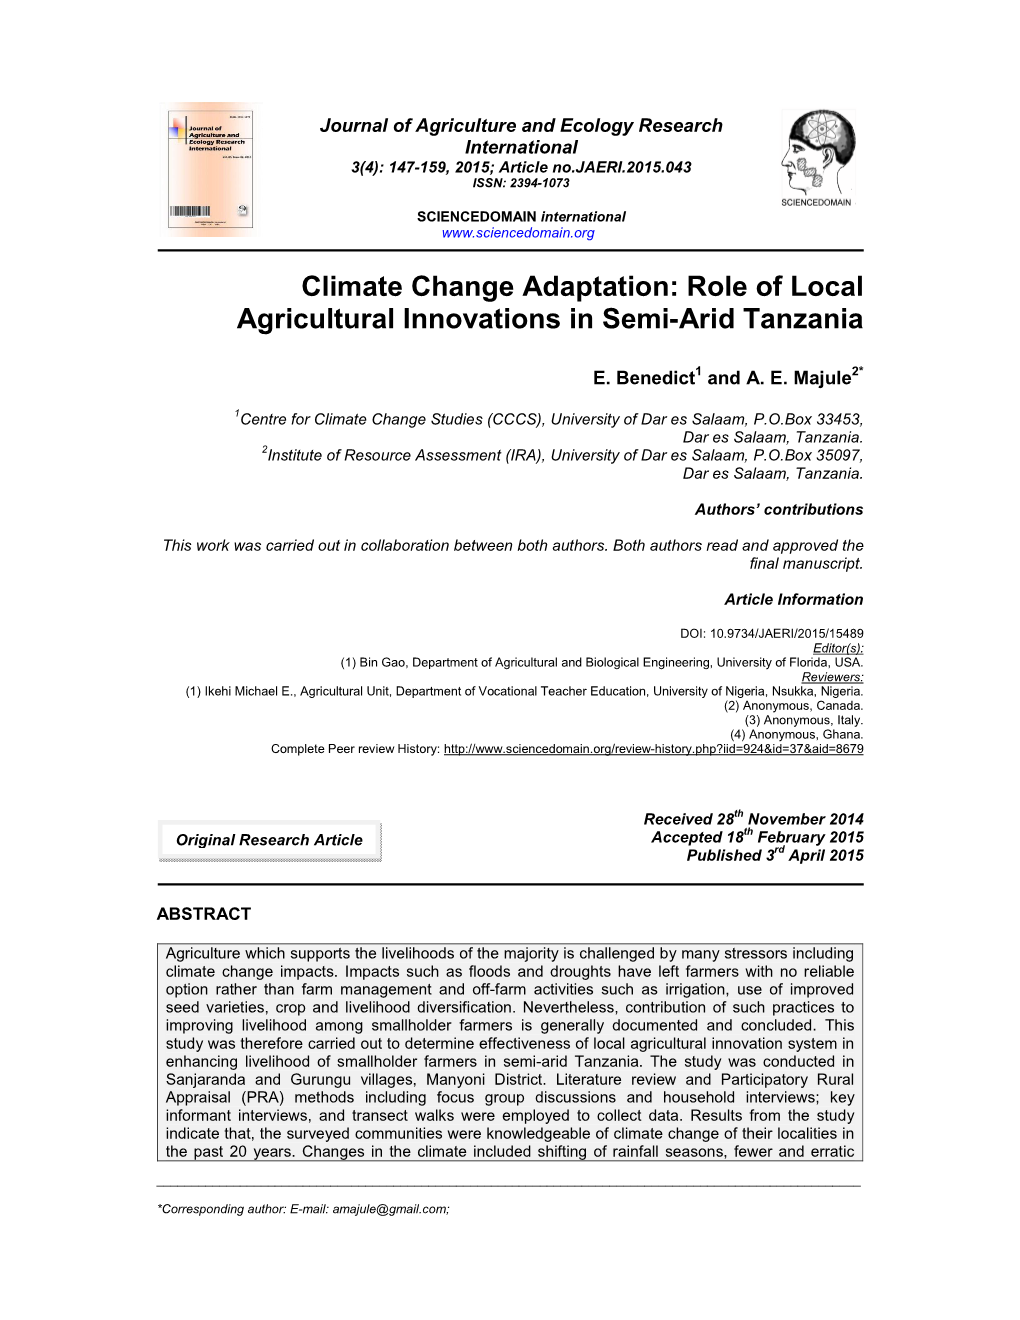 Role of Local Agricultural Innovations in Semi-Arid Tanzania